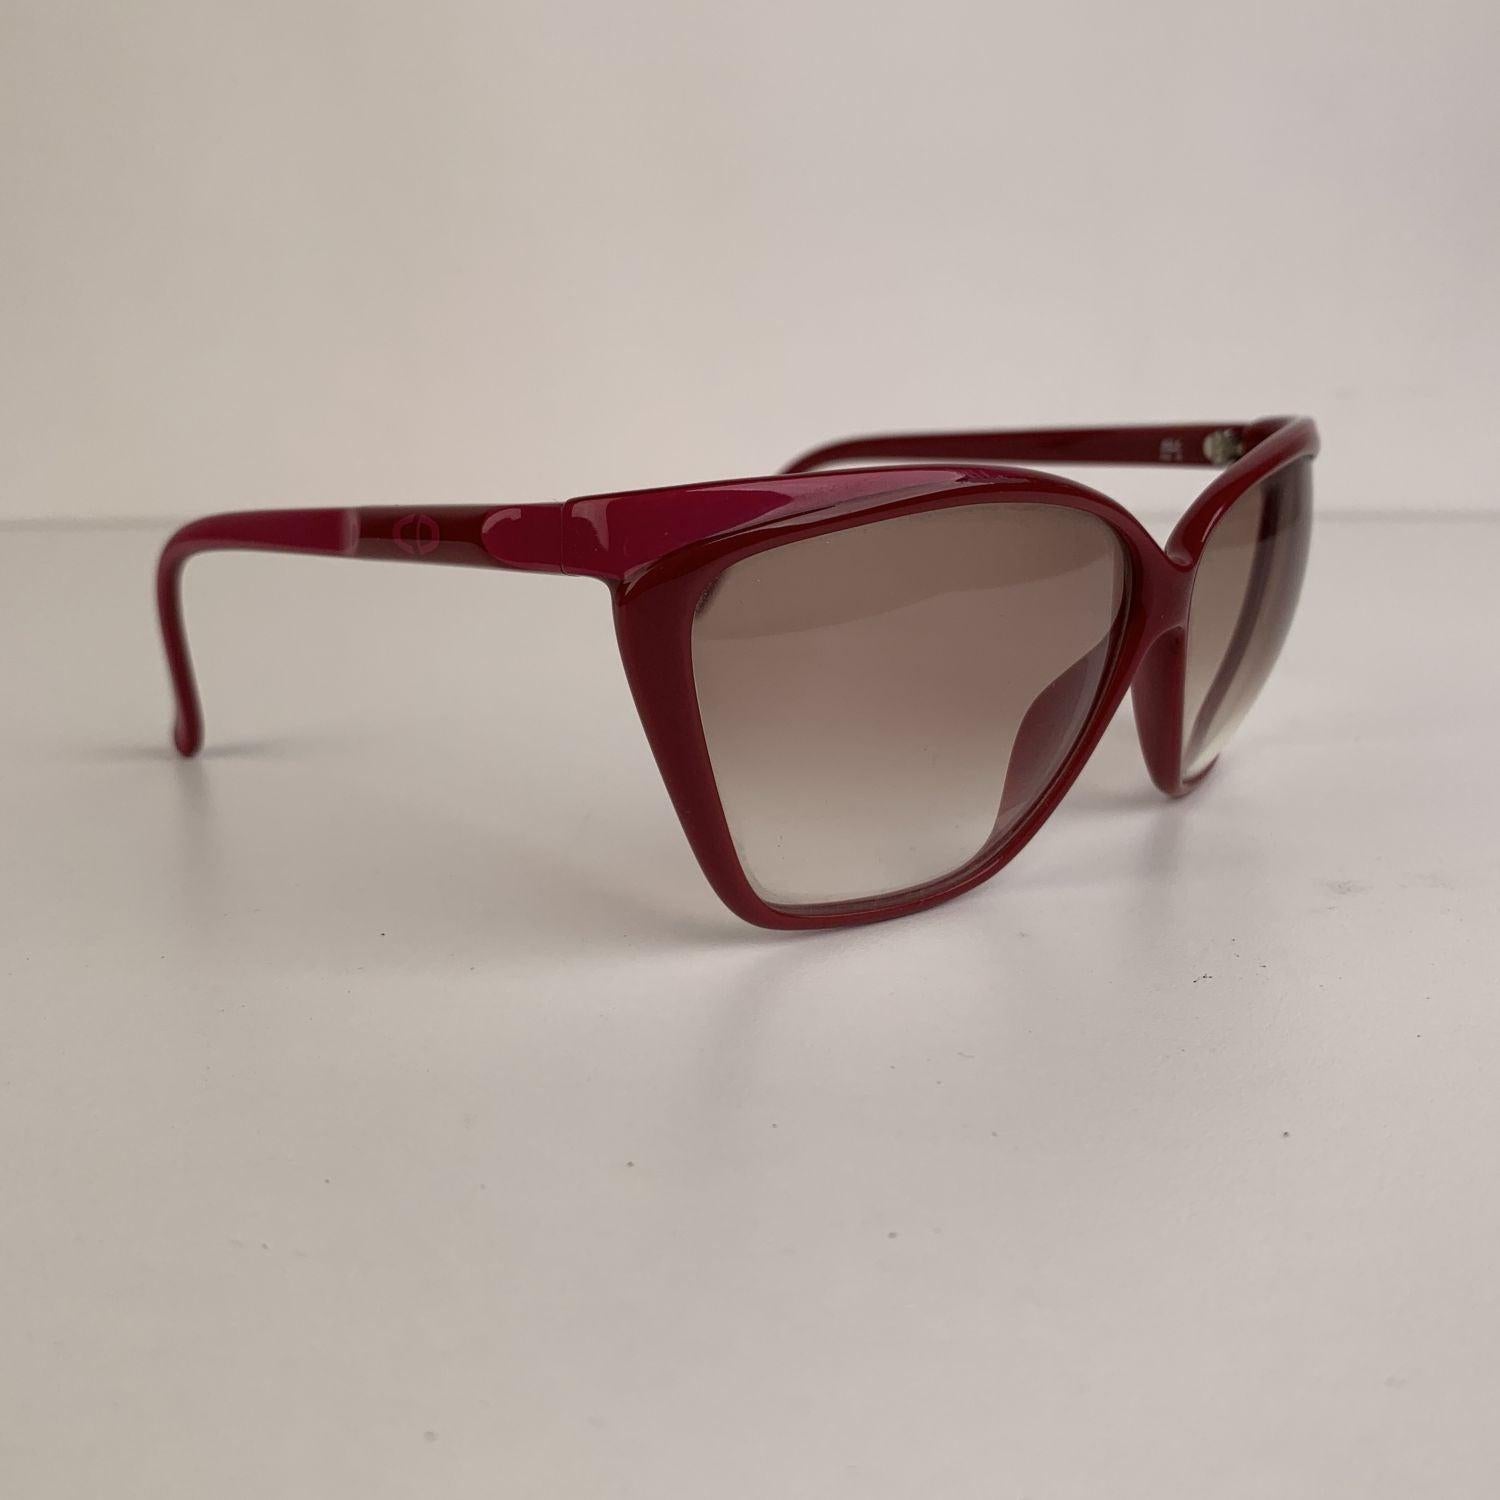 Christian Dior Vintage Burgundy Pink Optyl Sunglasses Mod 2324 In Excellent Condition For Sale In Rome, Rome